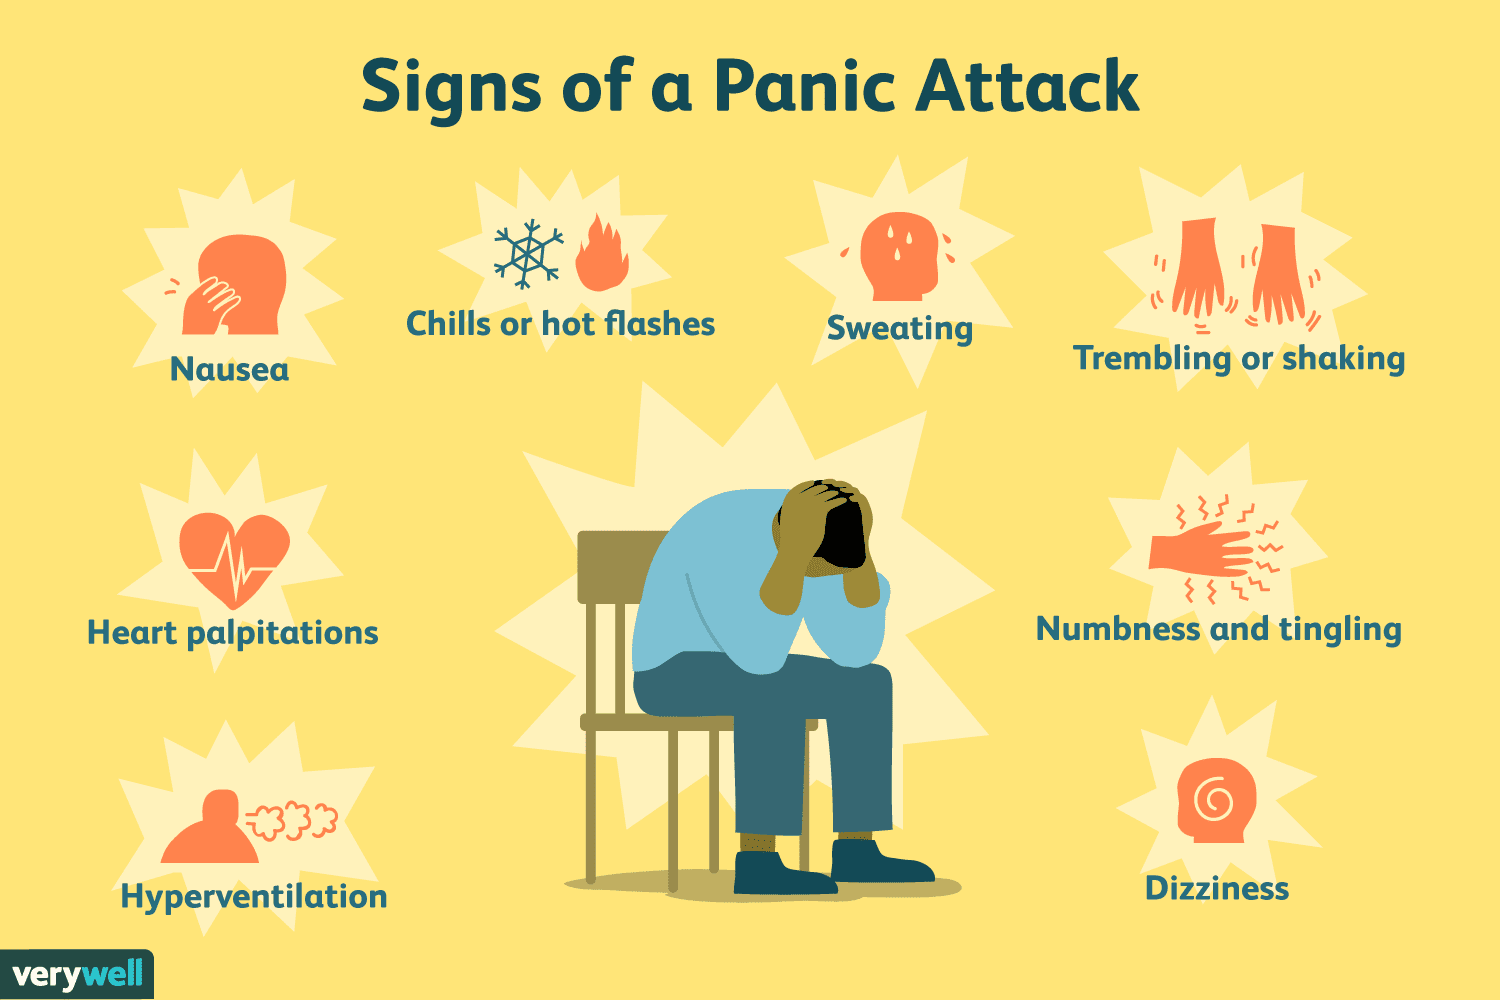 Trembling, Shaking, and Other Symptoms of Panic Attacks